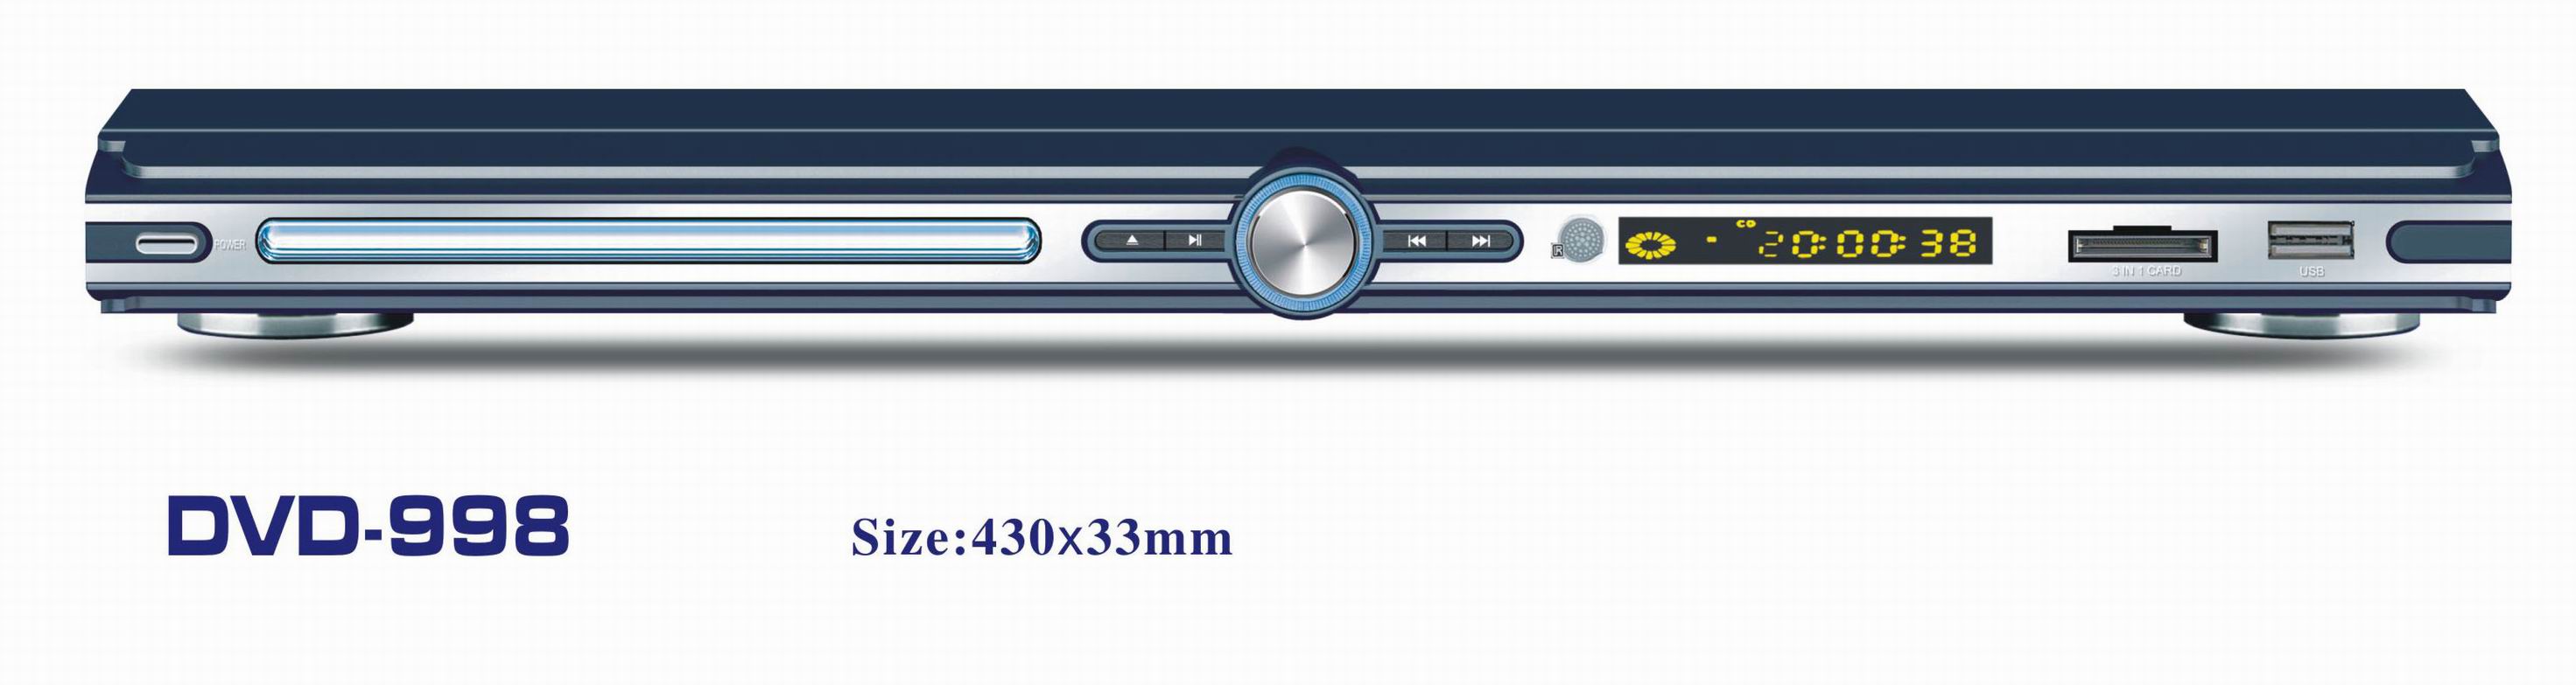 DVD Player with USB and Card Reader:DVD-998